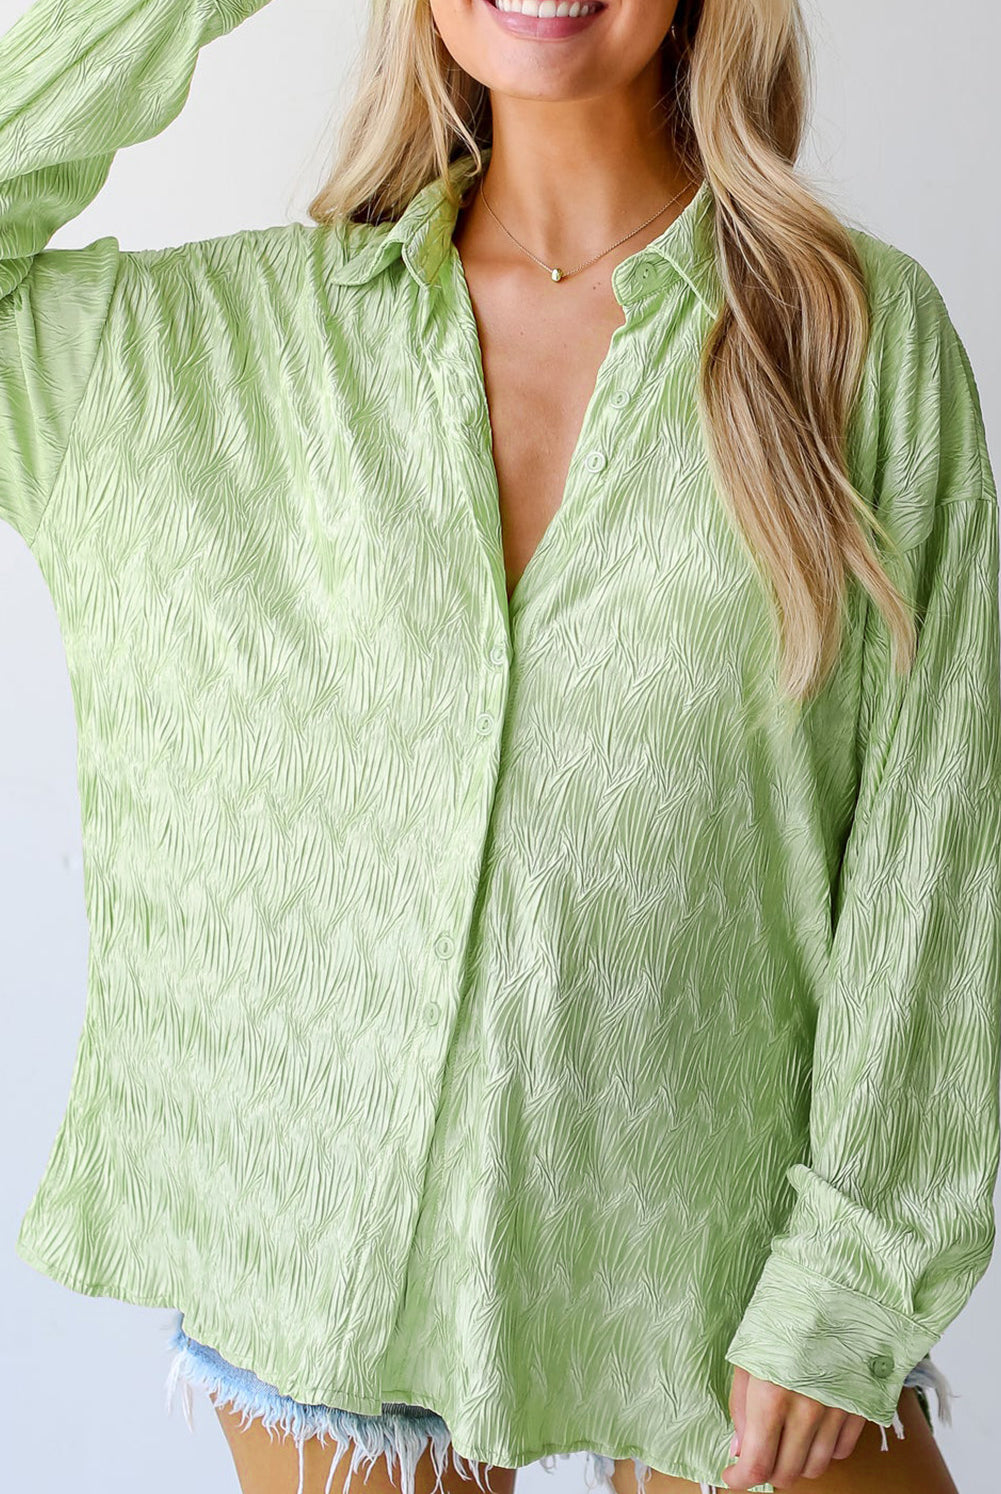 A light green, long-sleeve shirt with a distinctive textured pattern, offering a button-down front and a casual fit. Worn by a woman with blonde hair, it's styled with denim shorts, with the photo capturing from the waist up.